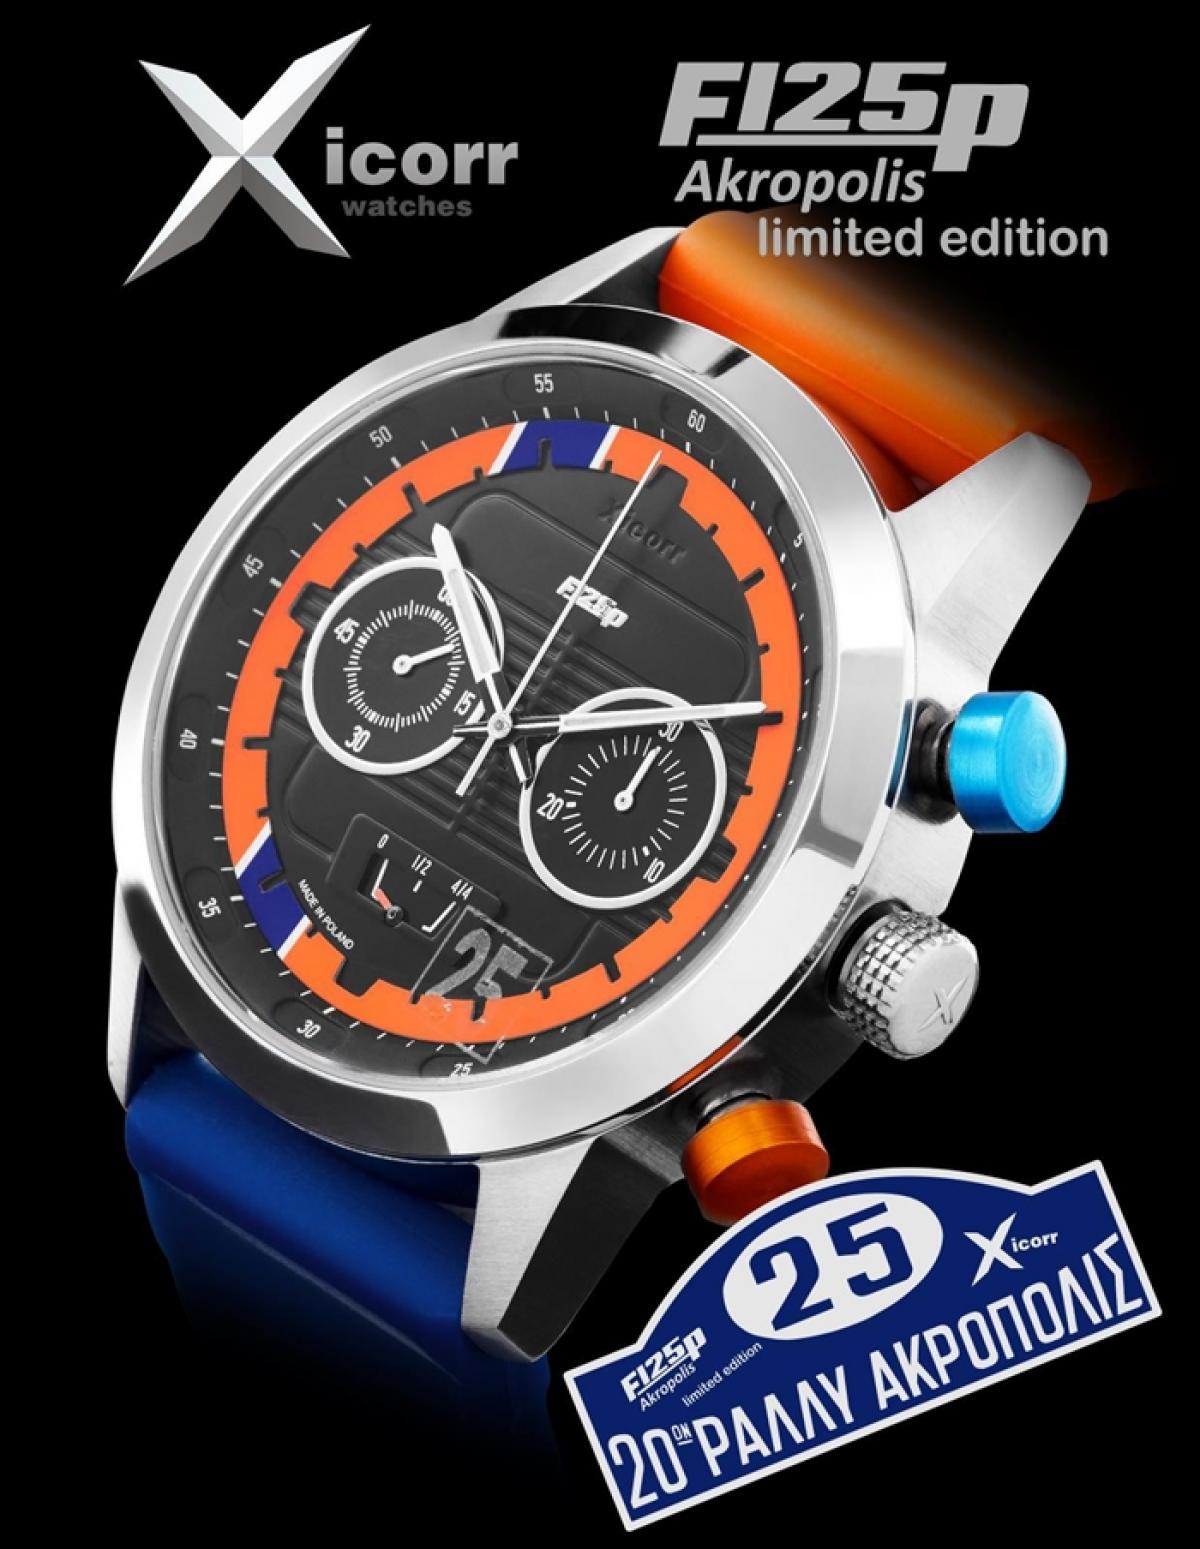 F125p Akropolis limited edition